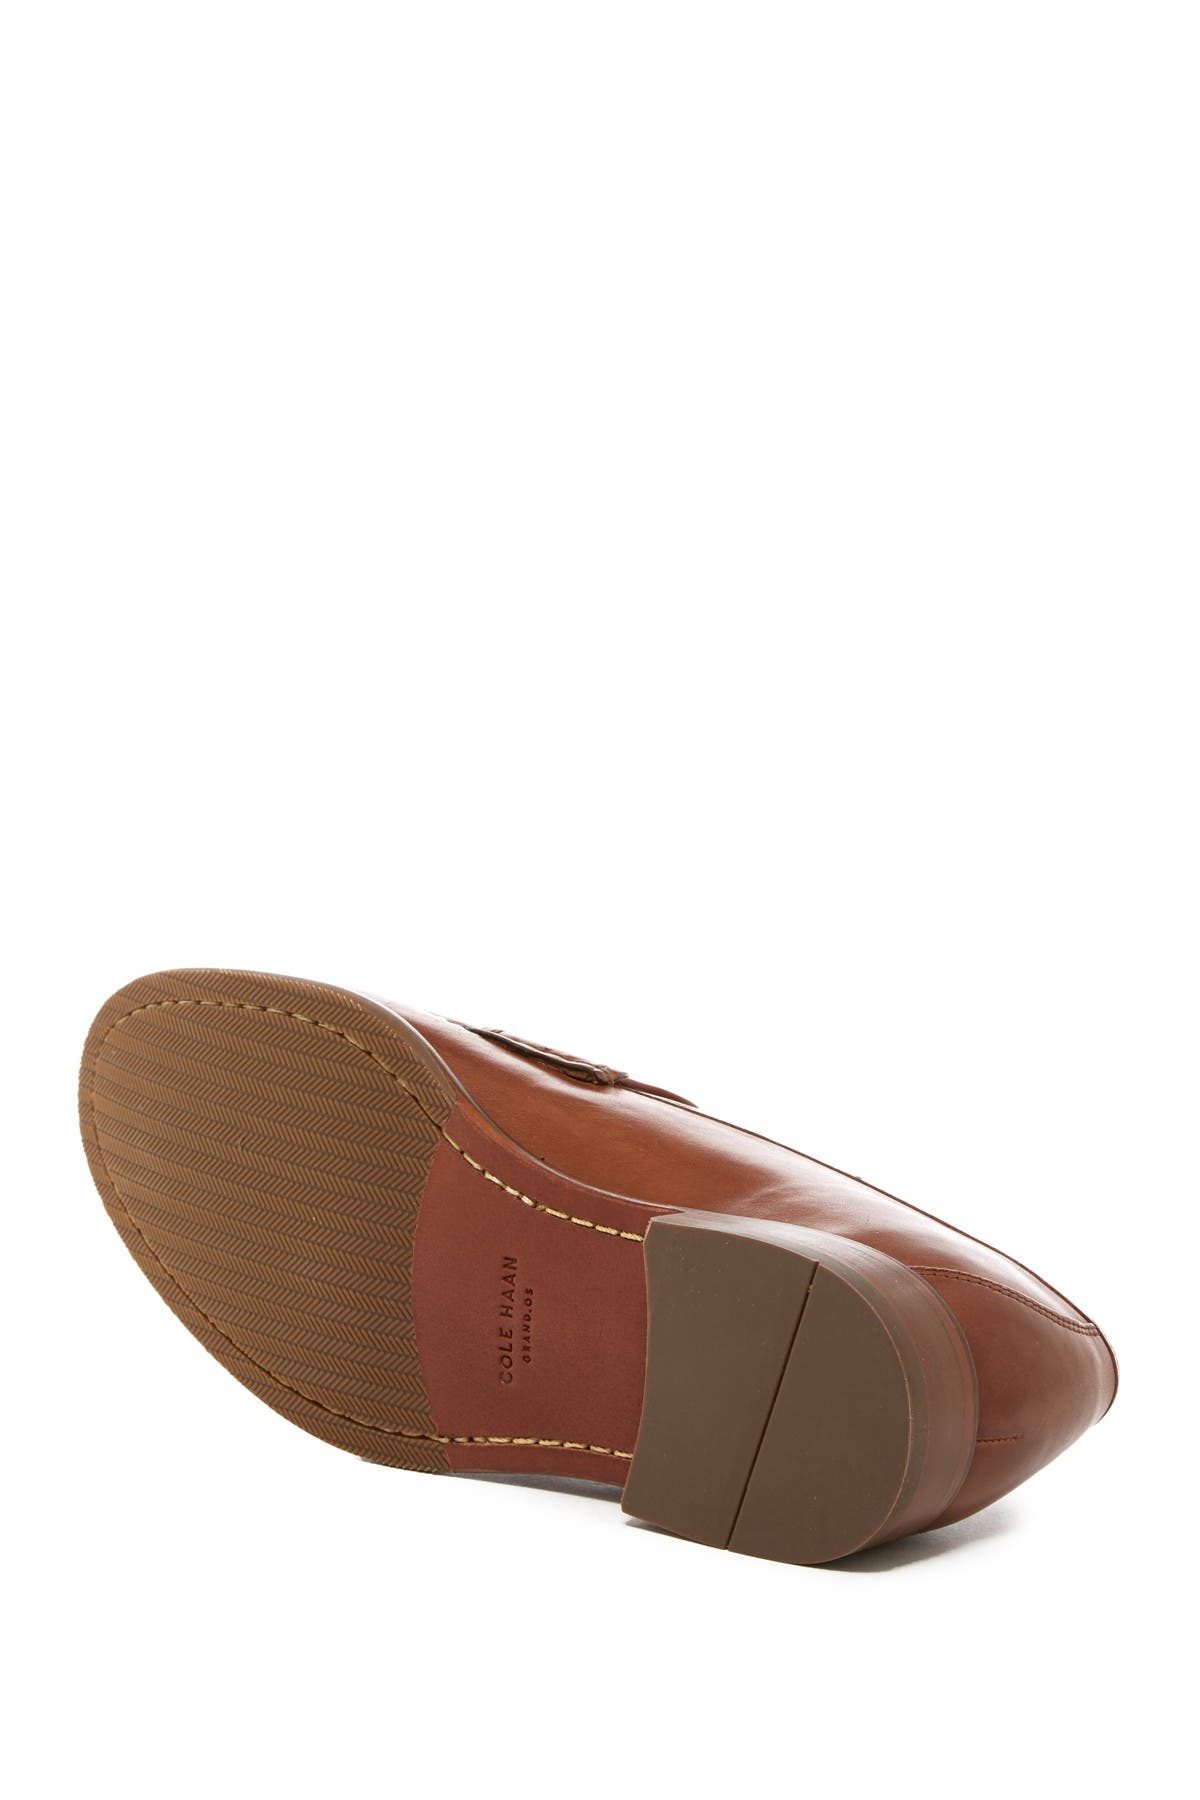 aiden grand ii penny loafer